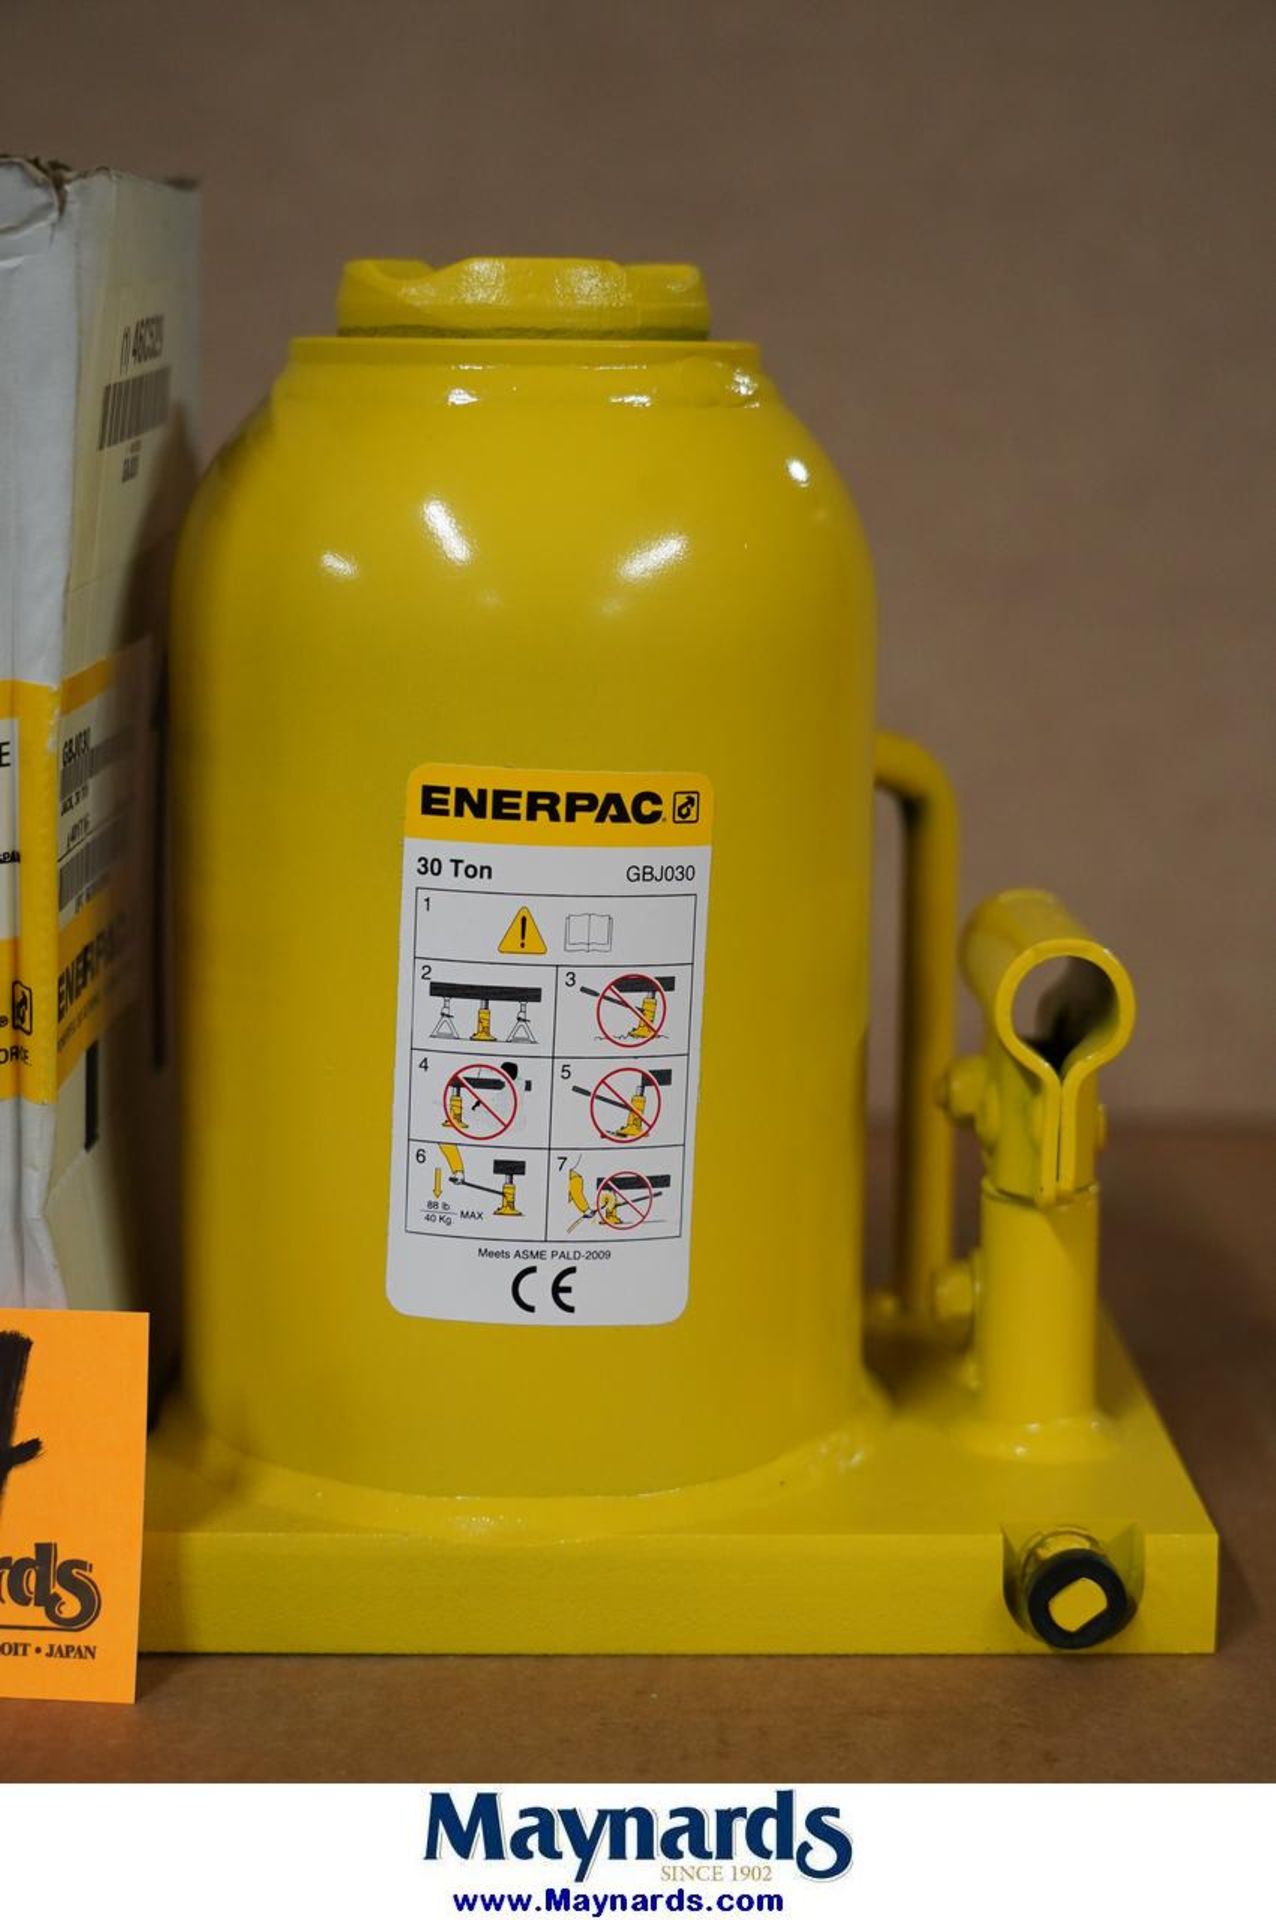 Enerpac GBJ030 30 Ton Self Contained Hydraulic Bottle Jack - Image 2 of 3